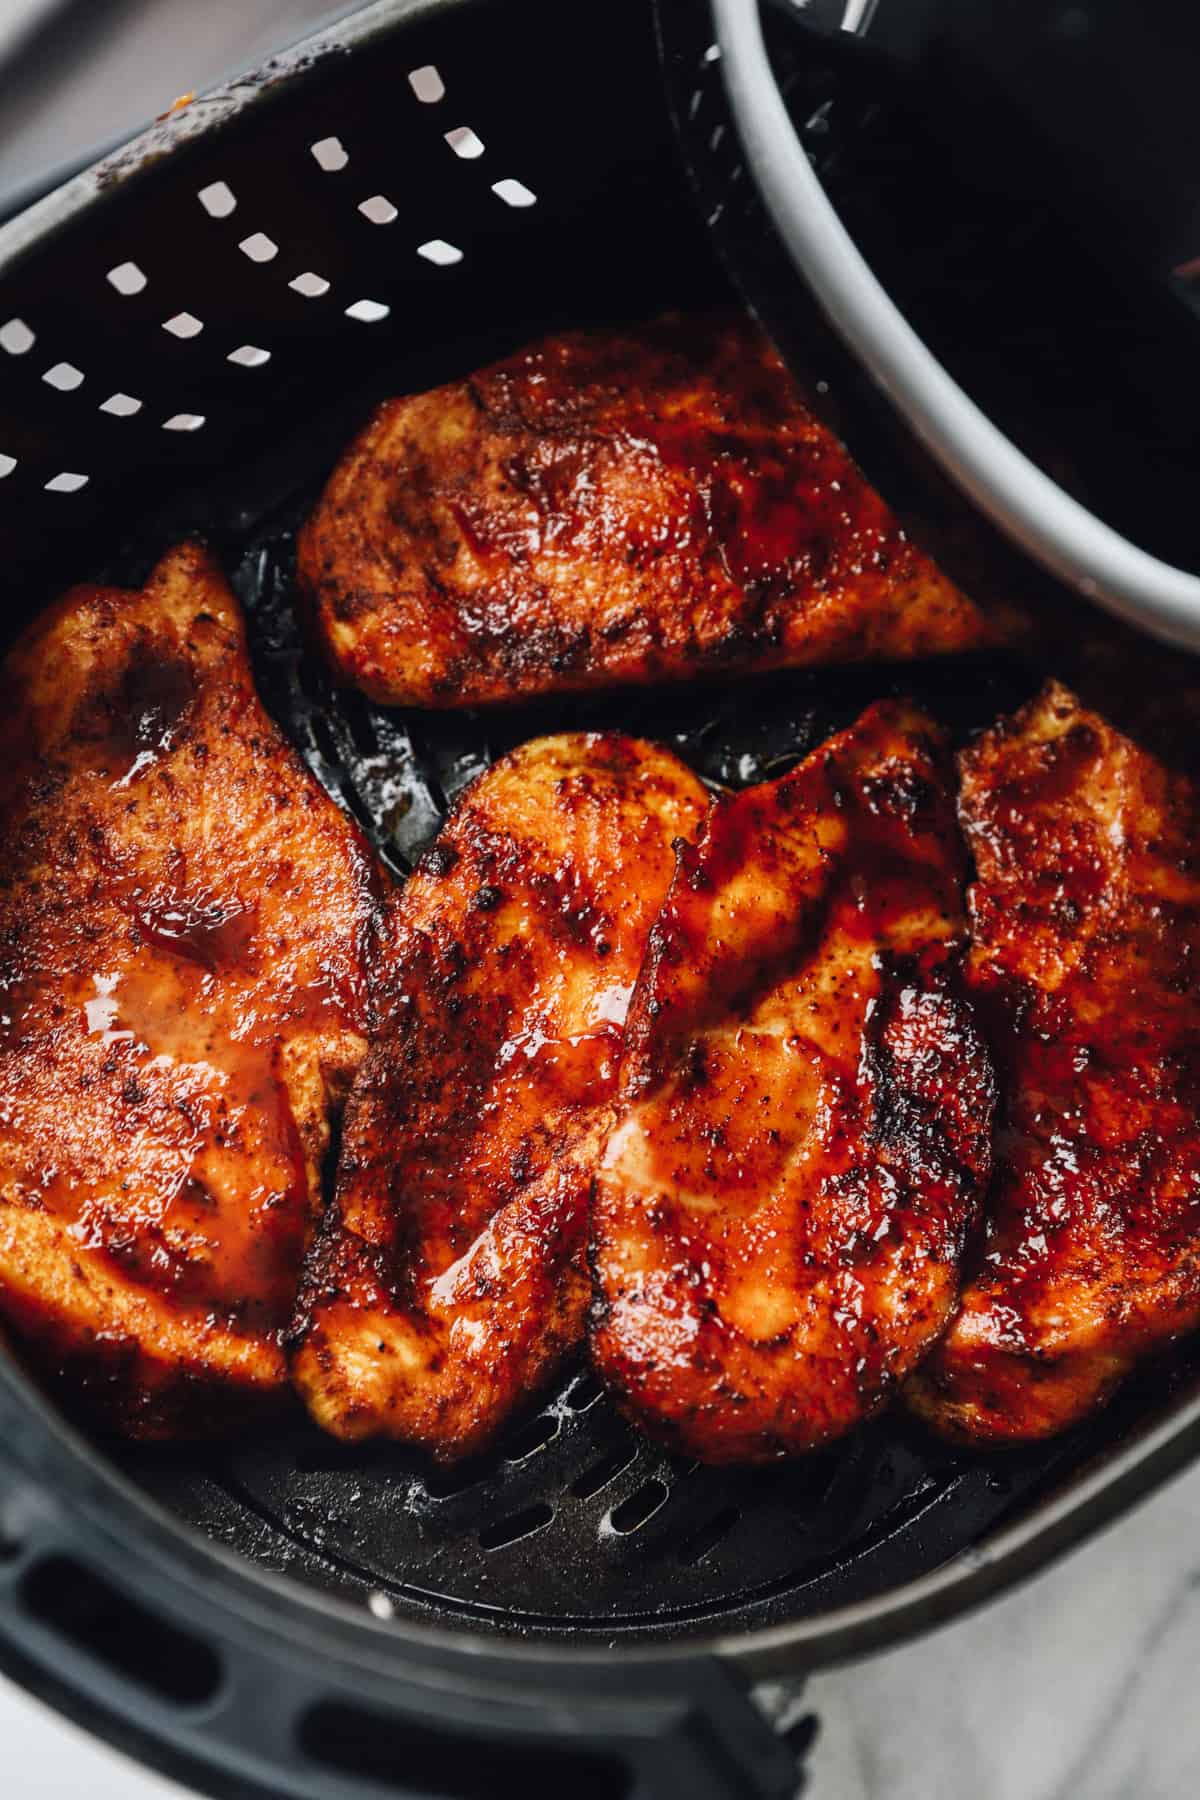 https://easychickenrecipes.com/wp-content/uploads/2022/03/How-To-Air-Fryer-BBQ-Chicken-Breasts-3.jpg